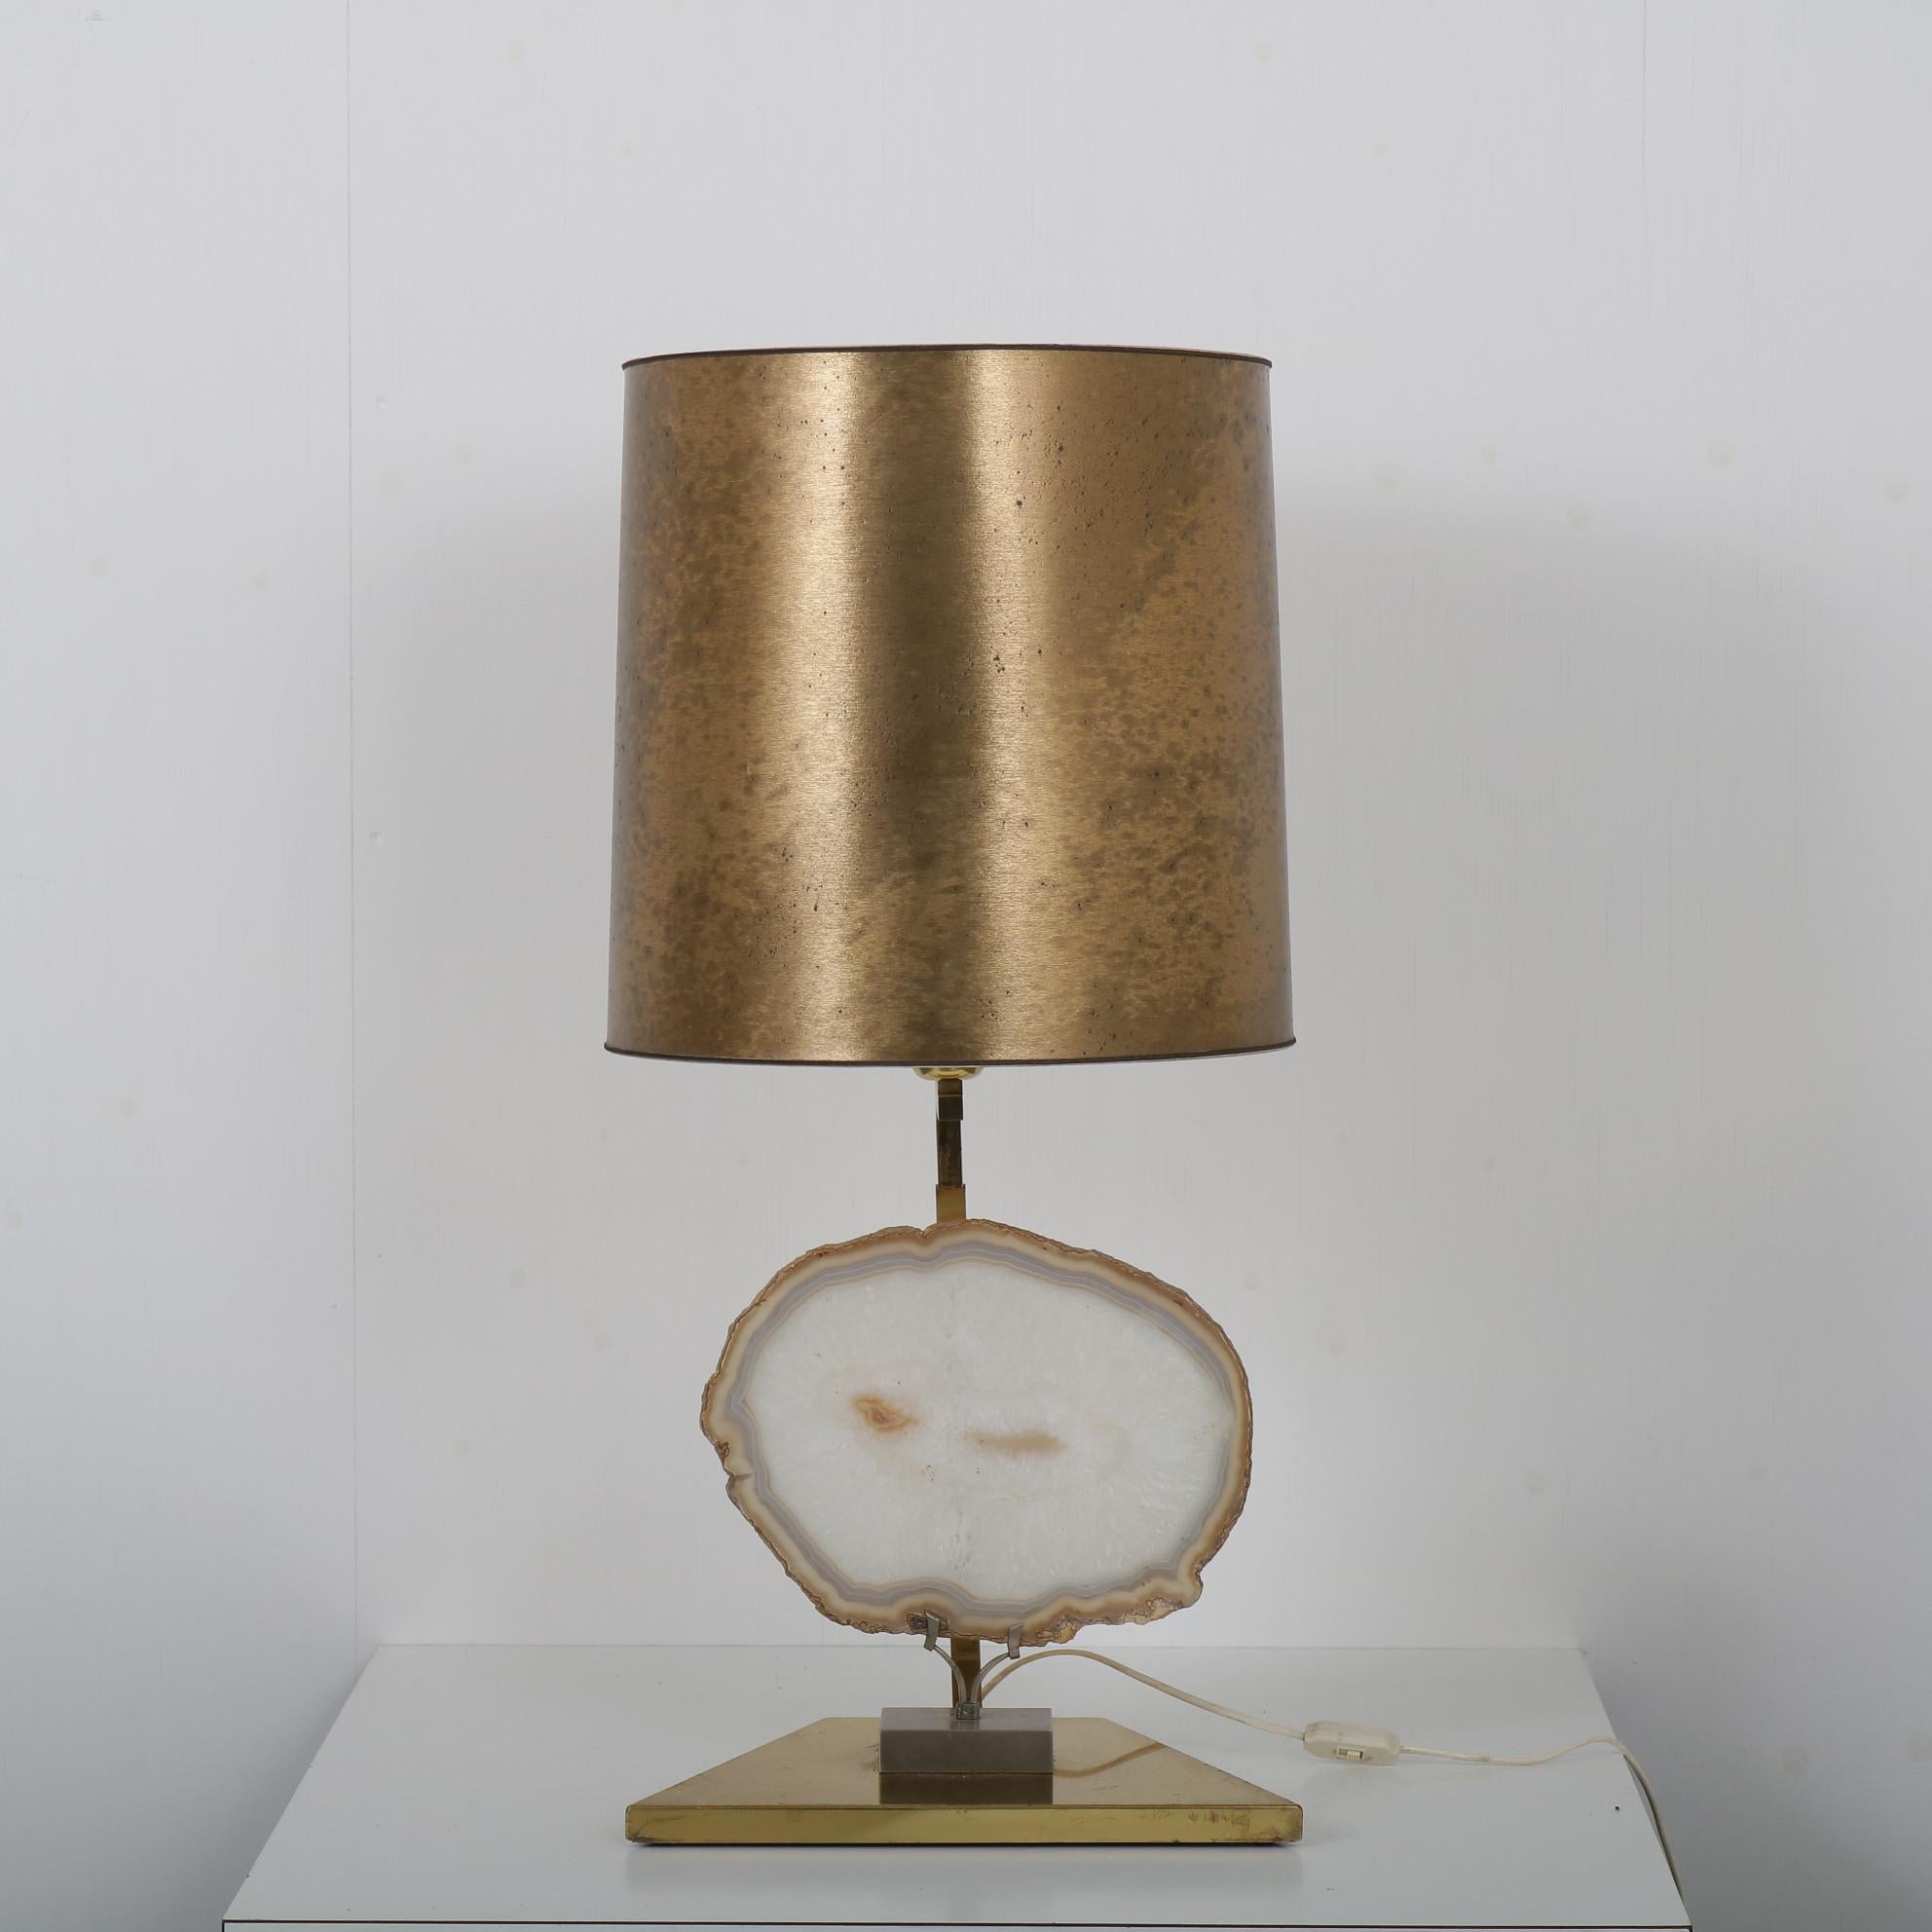 

An elegant table lamp with a big piece of agate stone (in the manner of Willy Daro), manufactured in Belgium around 1970.

The lamp has a beautiful brass base and a matching hood. The true eye-catcher is the stone made of rare agate in the base.